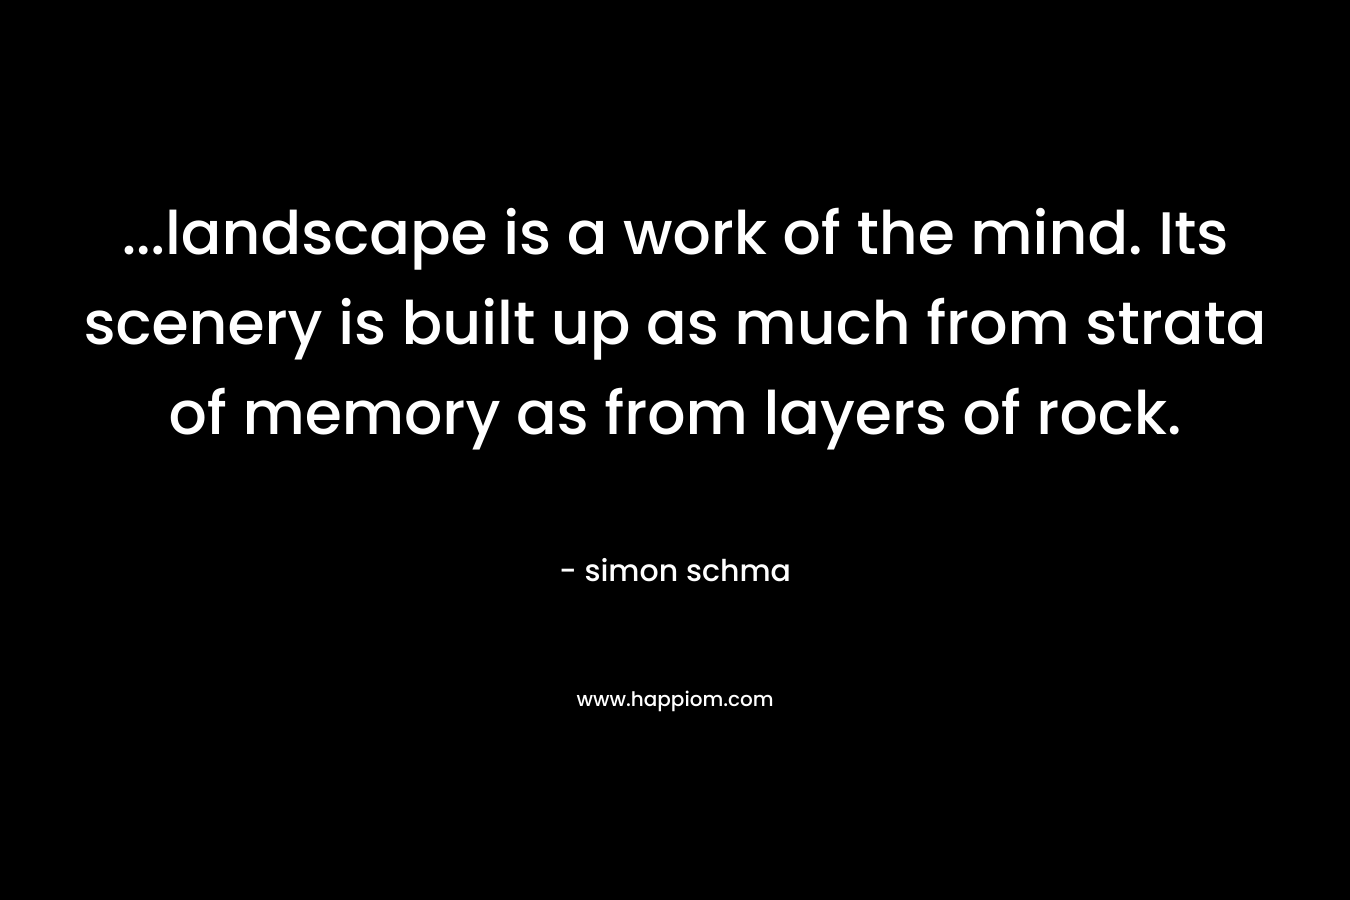 …landscape is a work of the mind. Its scenery is built up as much from strata of memory as from layers of rock. – simon schma